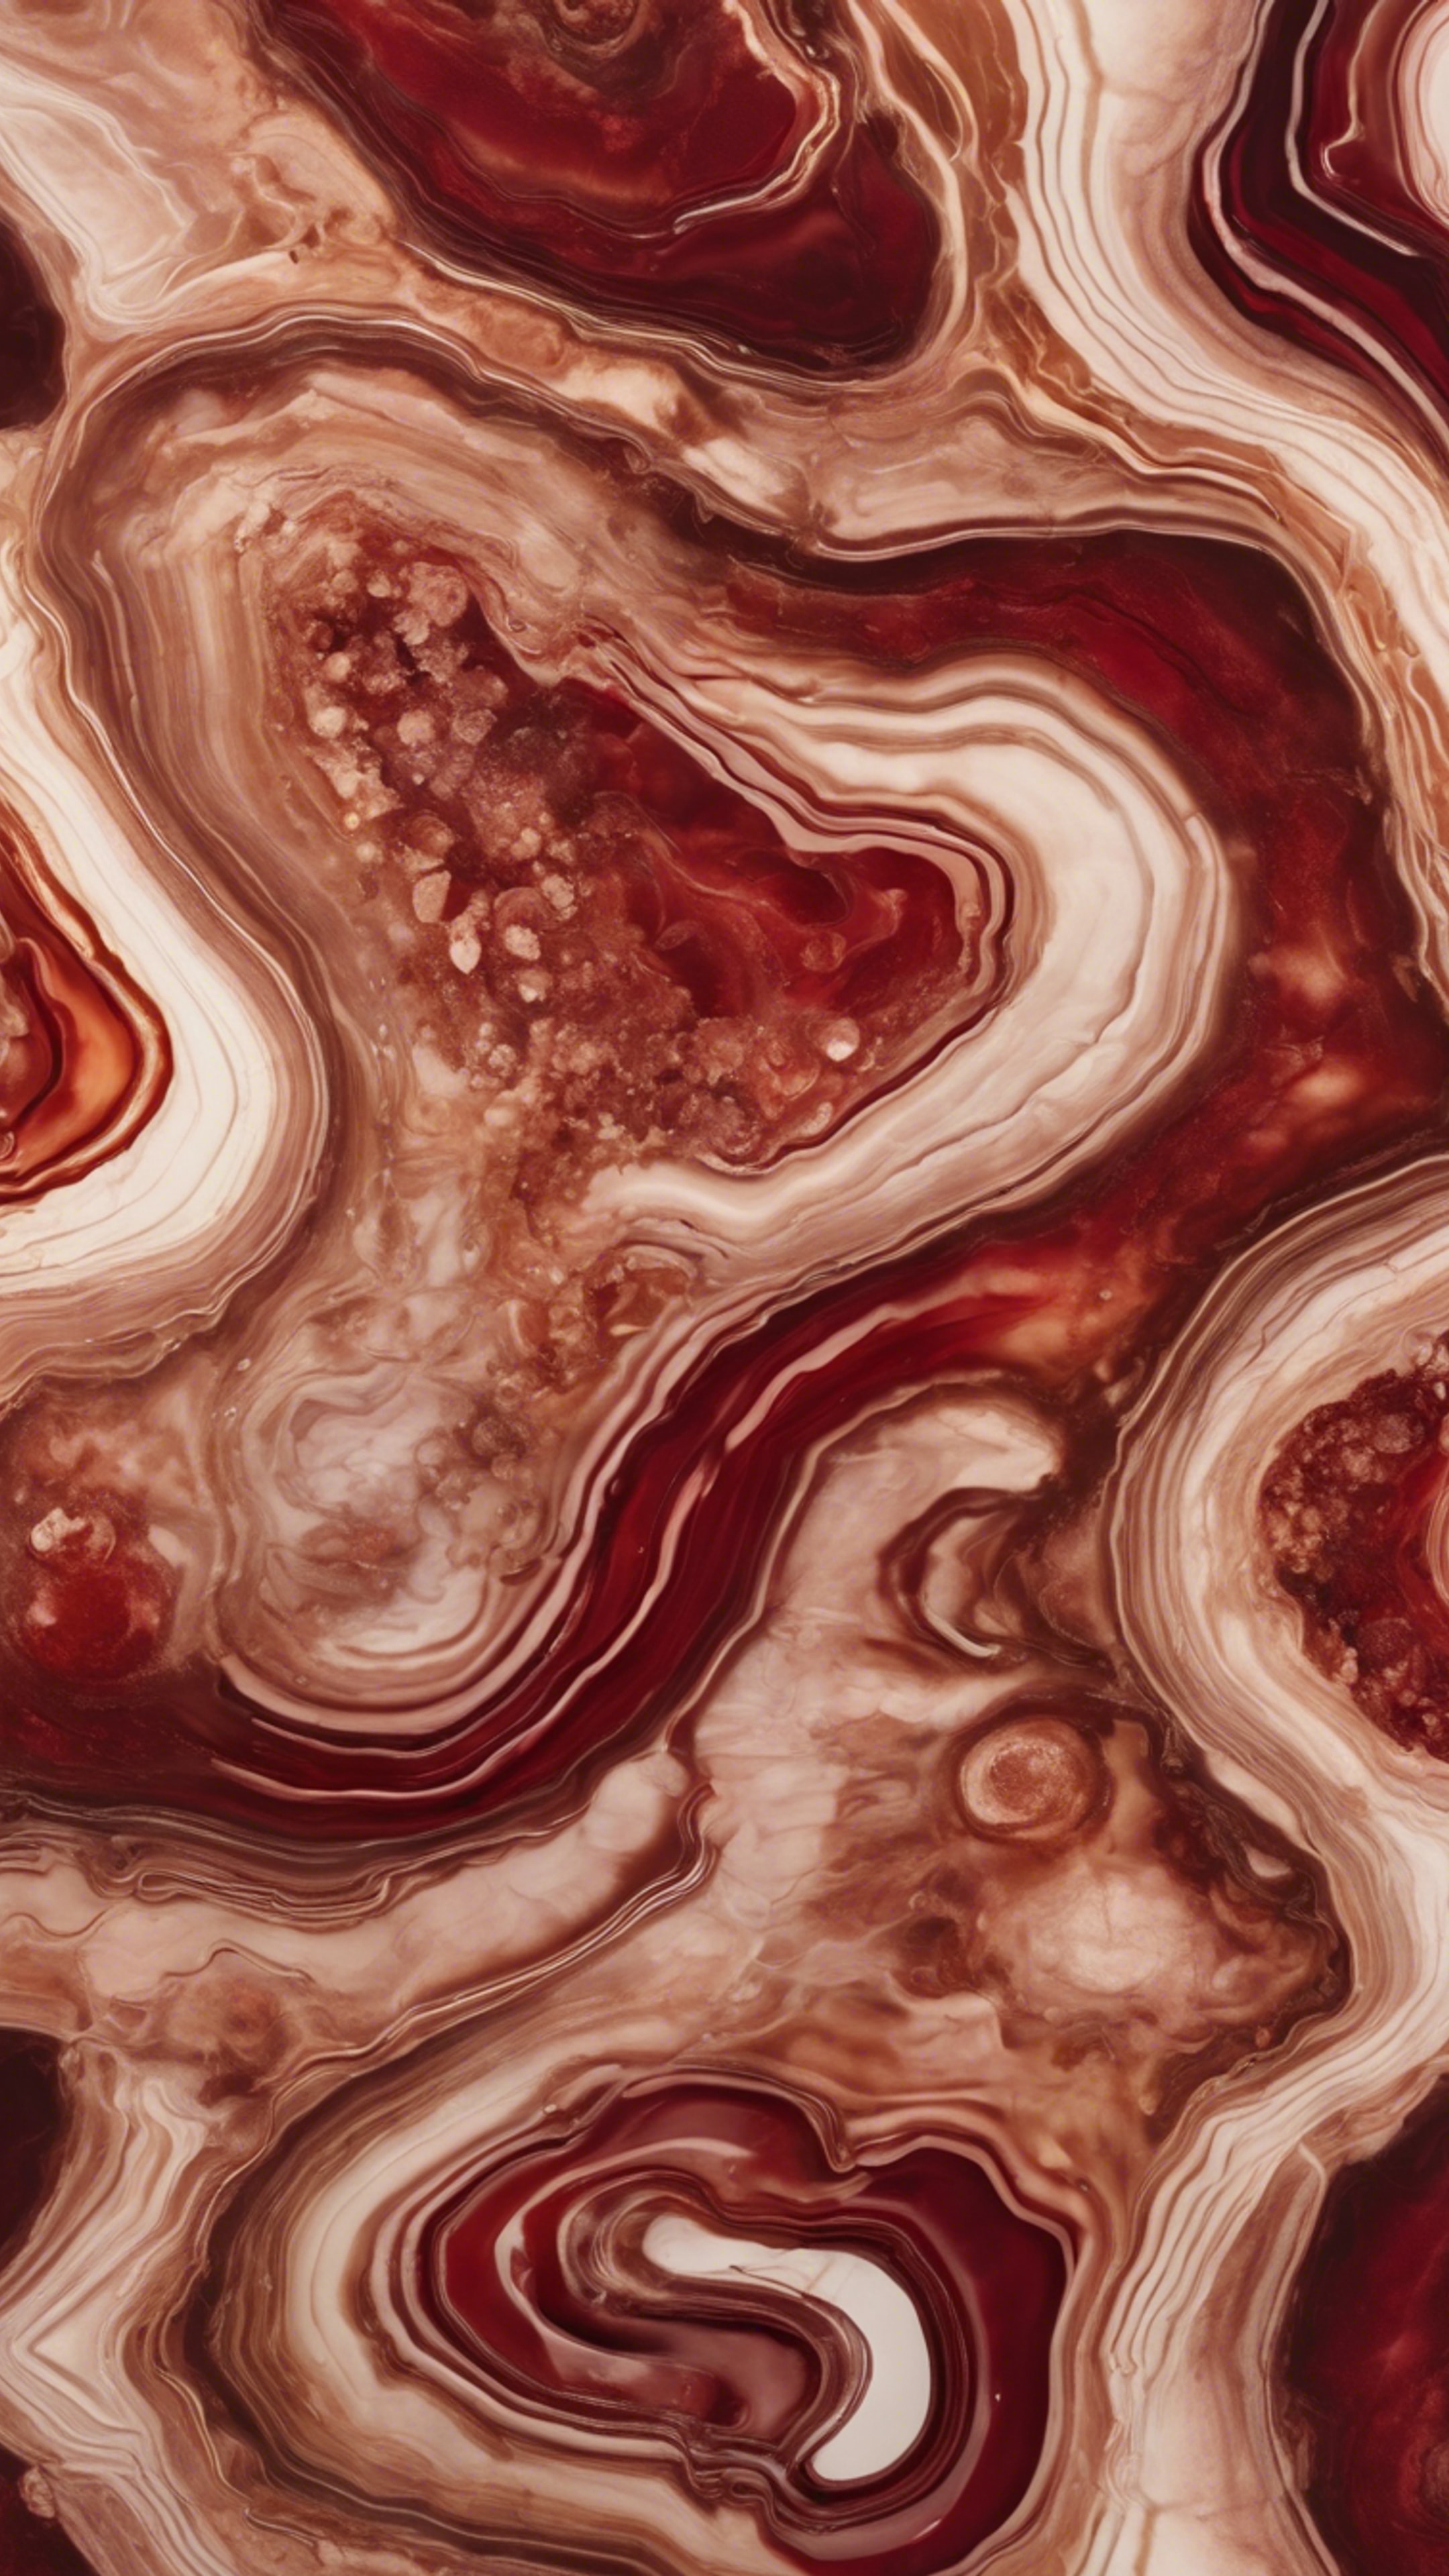 Grungy agate swirls in garnet red and sepia tones, forming a fascinating, abstract pattern. Tapet[bb48f1c473e4473bbd4a]